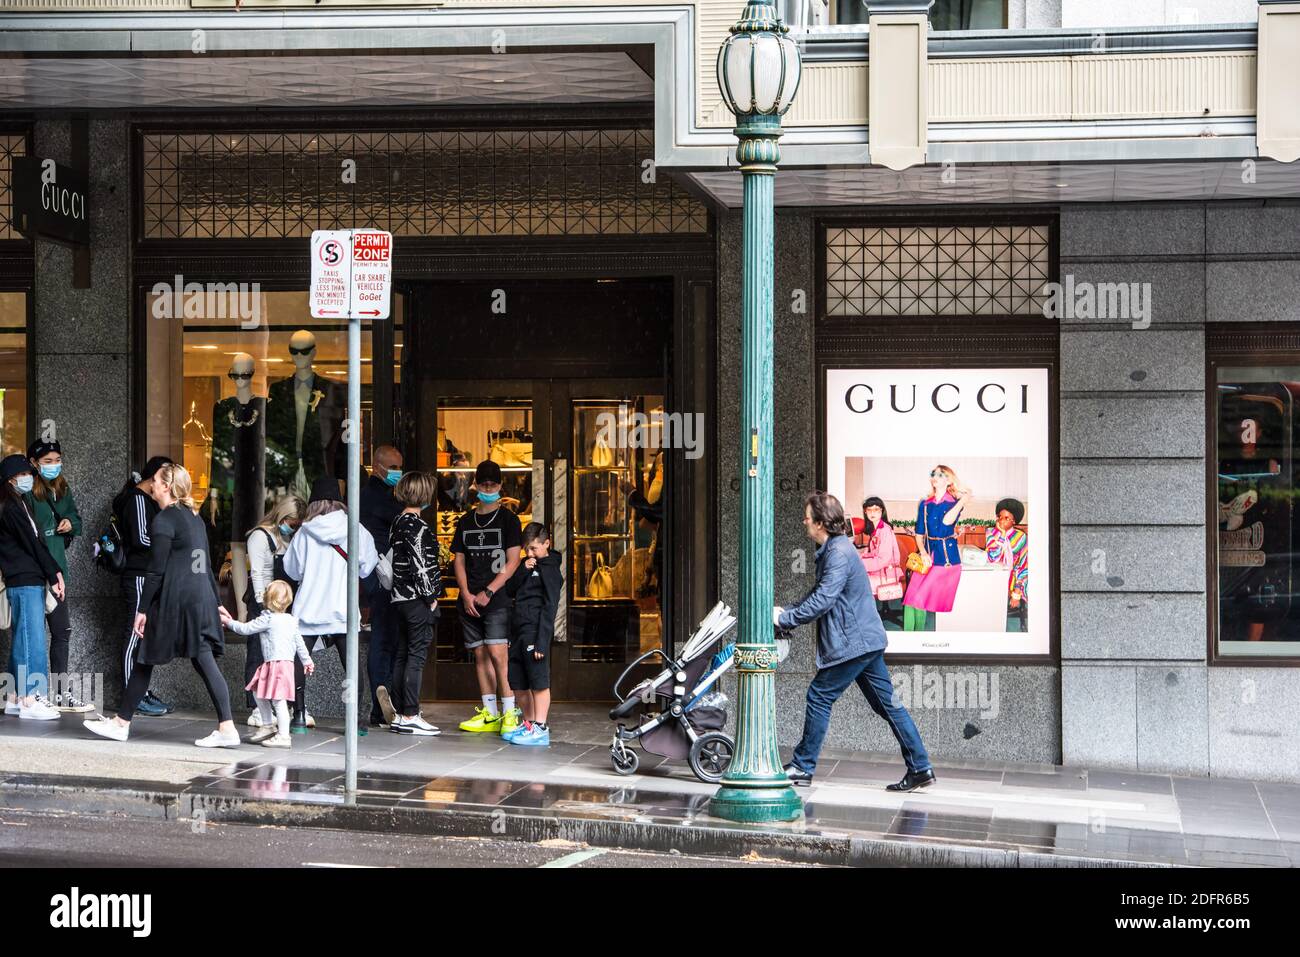 People seen lining up outside Gucci store on Collins Street in Melbourne CBD Stock Photo Alamy